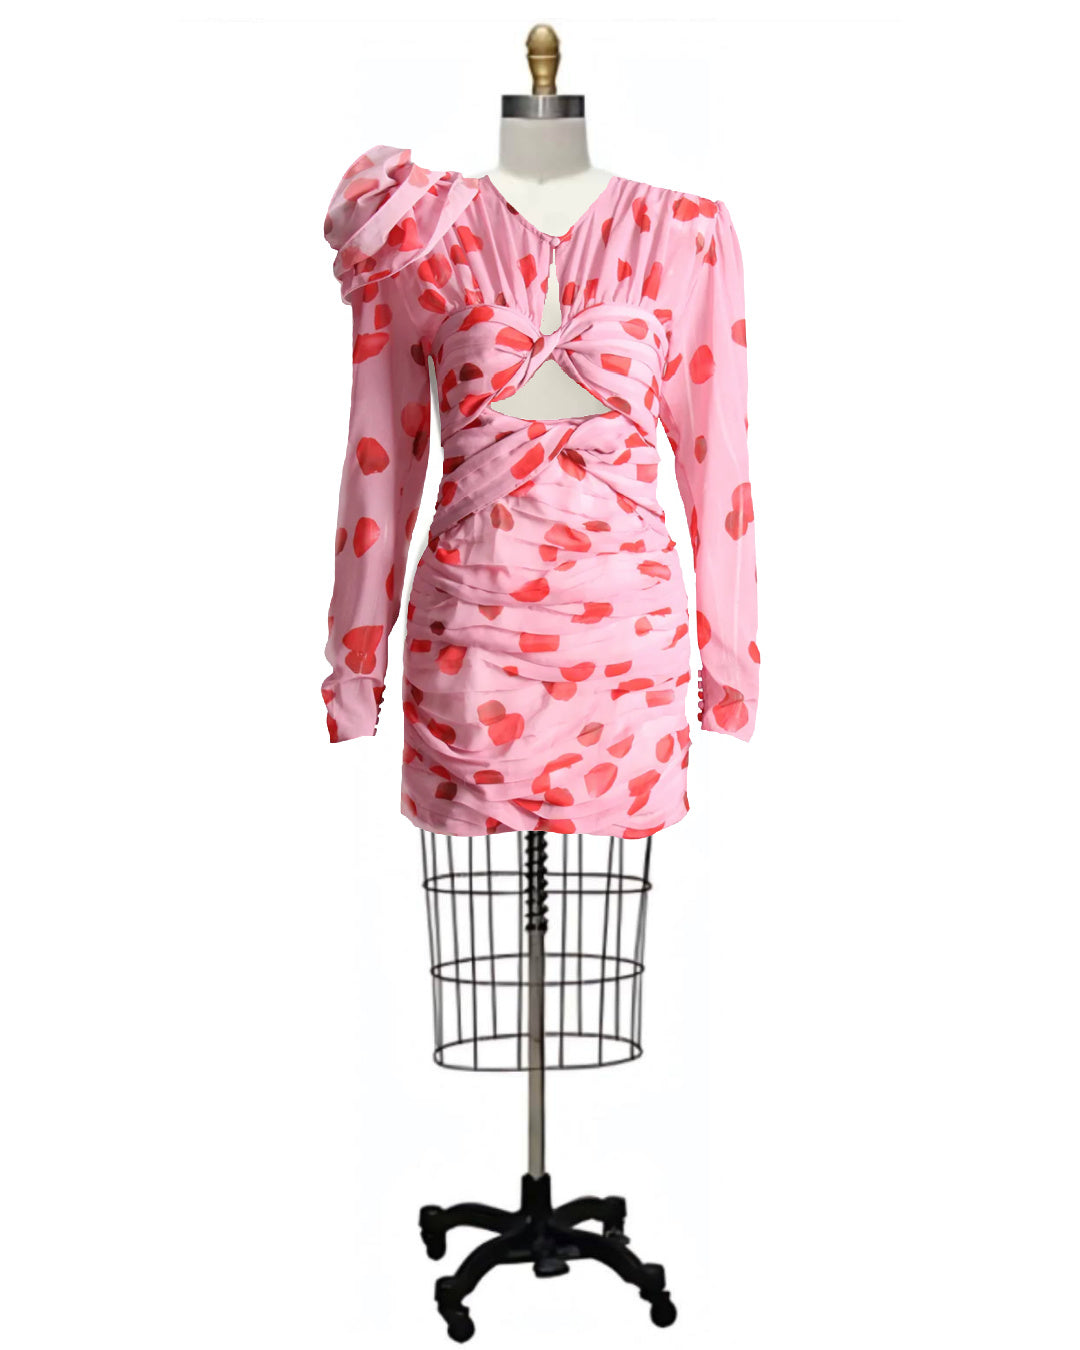 Pinked- the Ruched Pink and Red Polka Dot Print Cocktail Dress